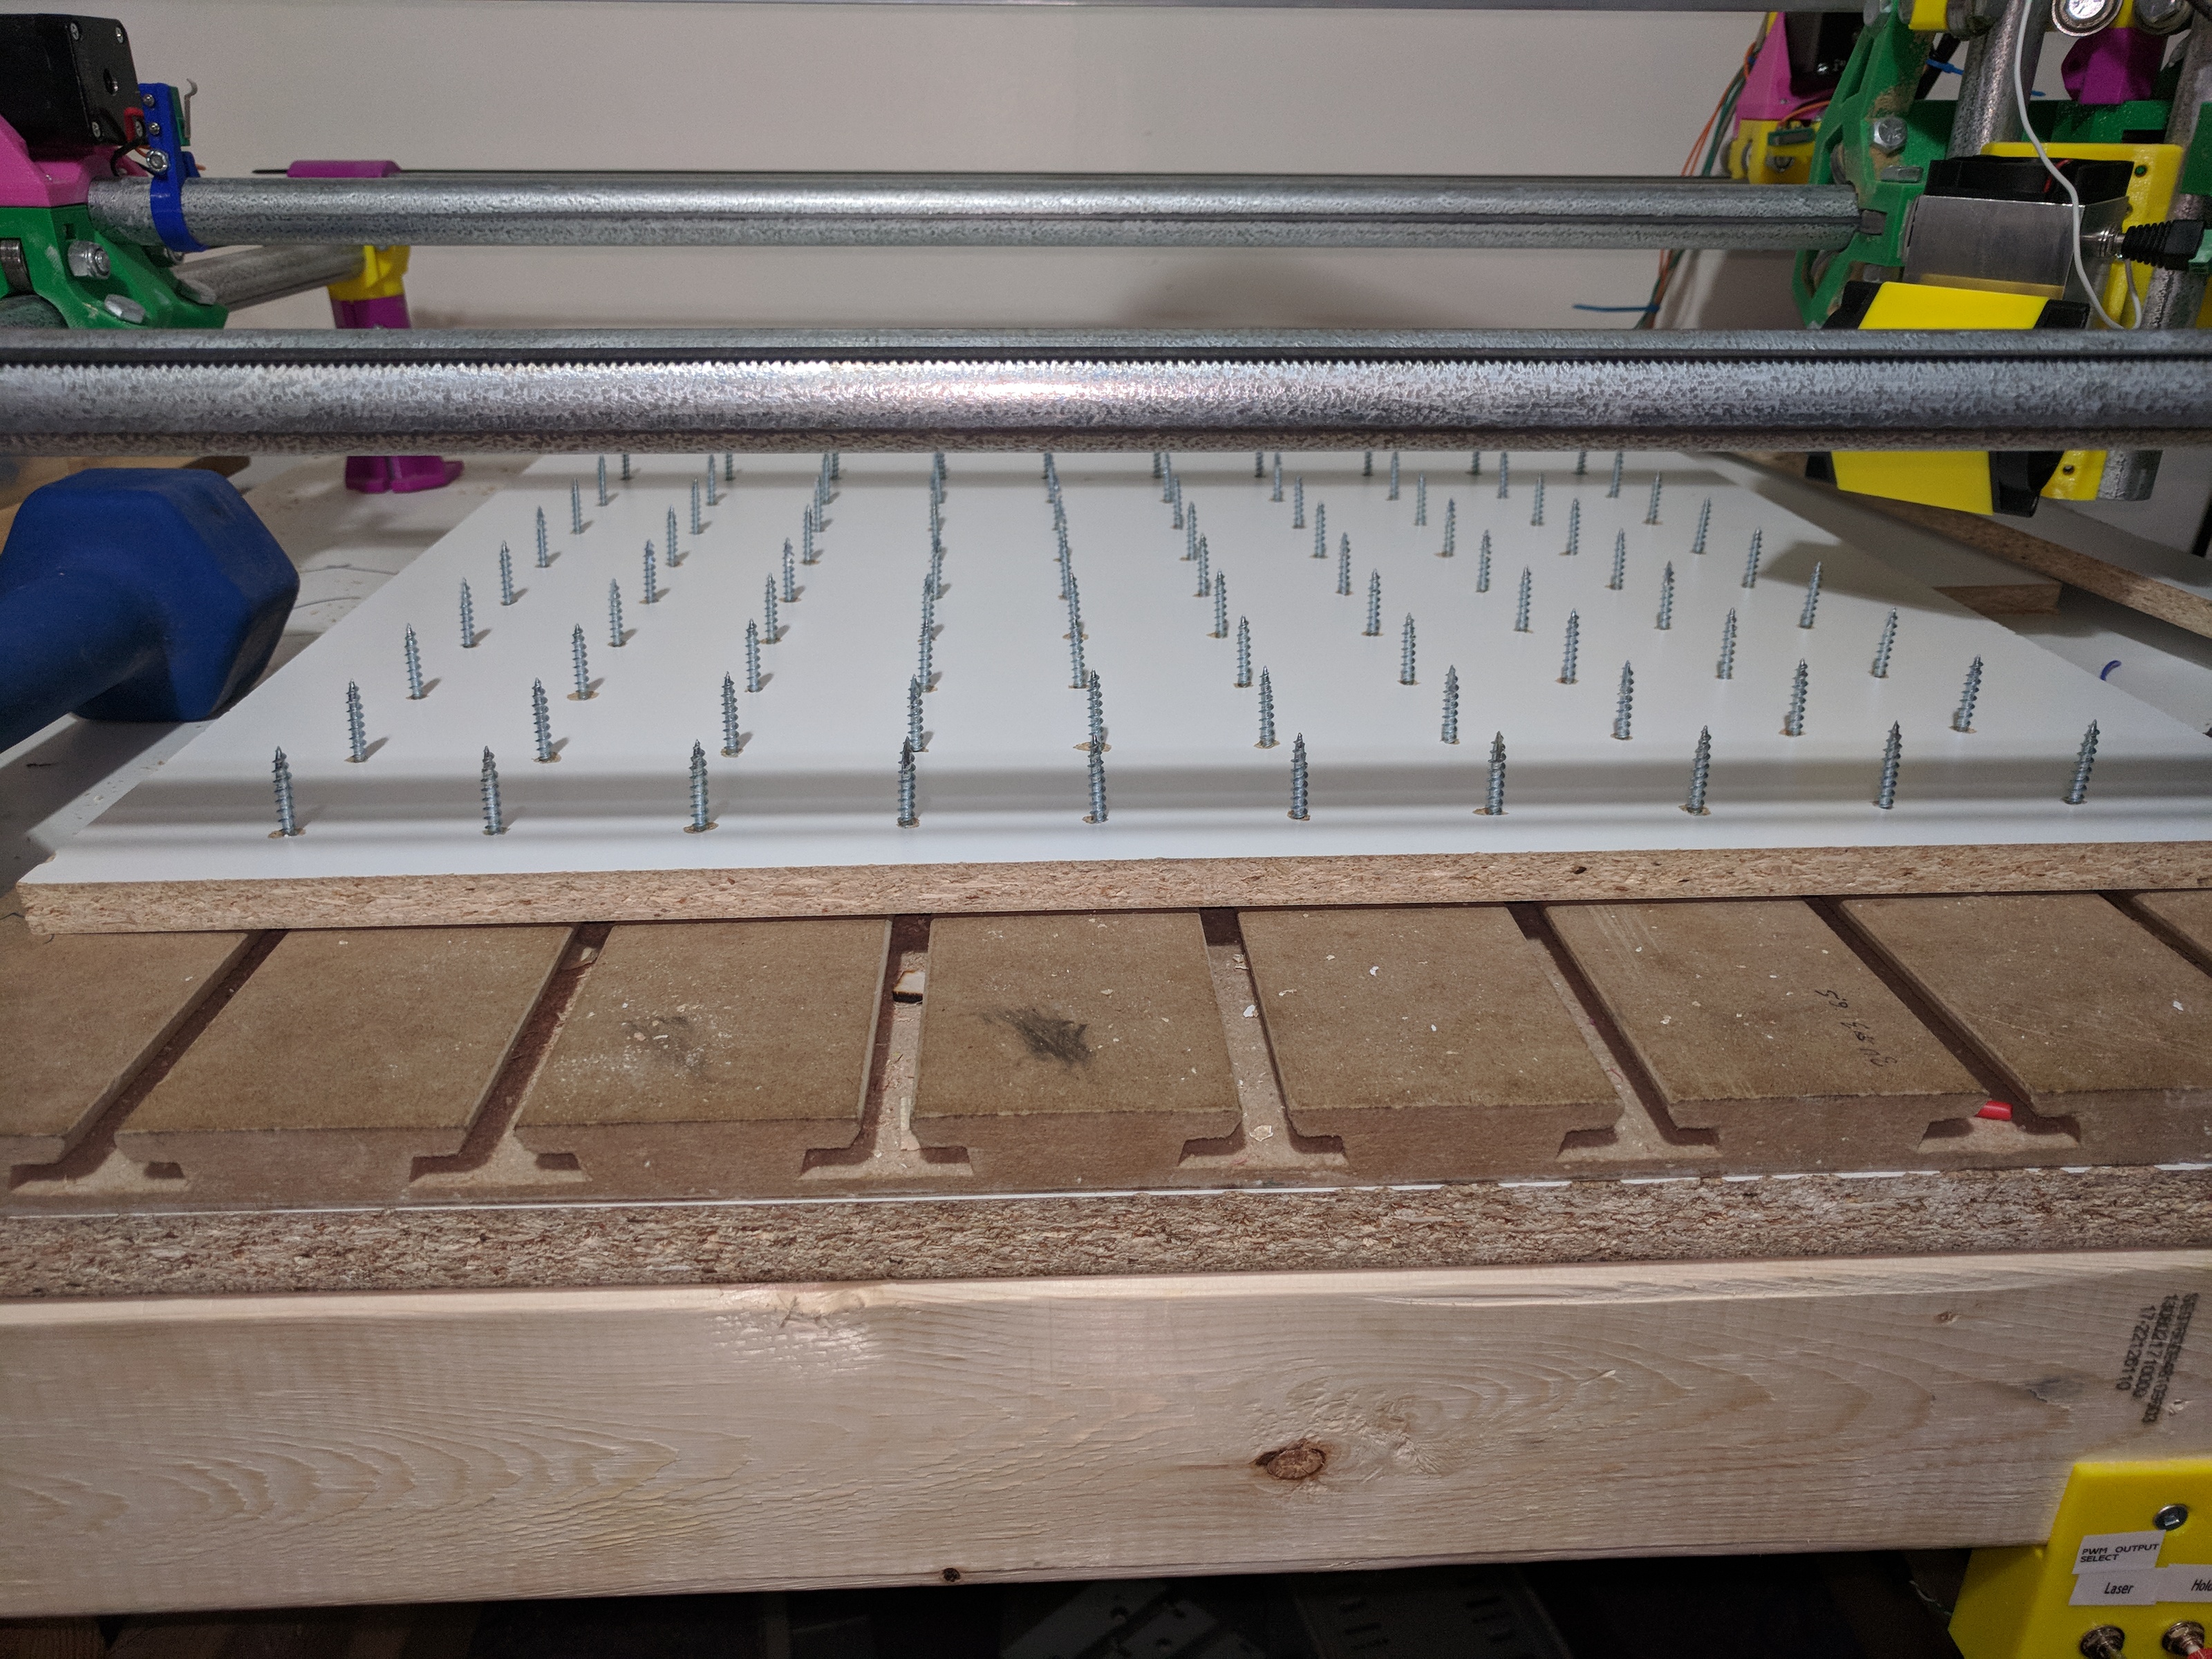 Bed of nails to support workpiece